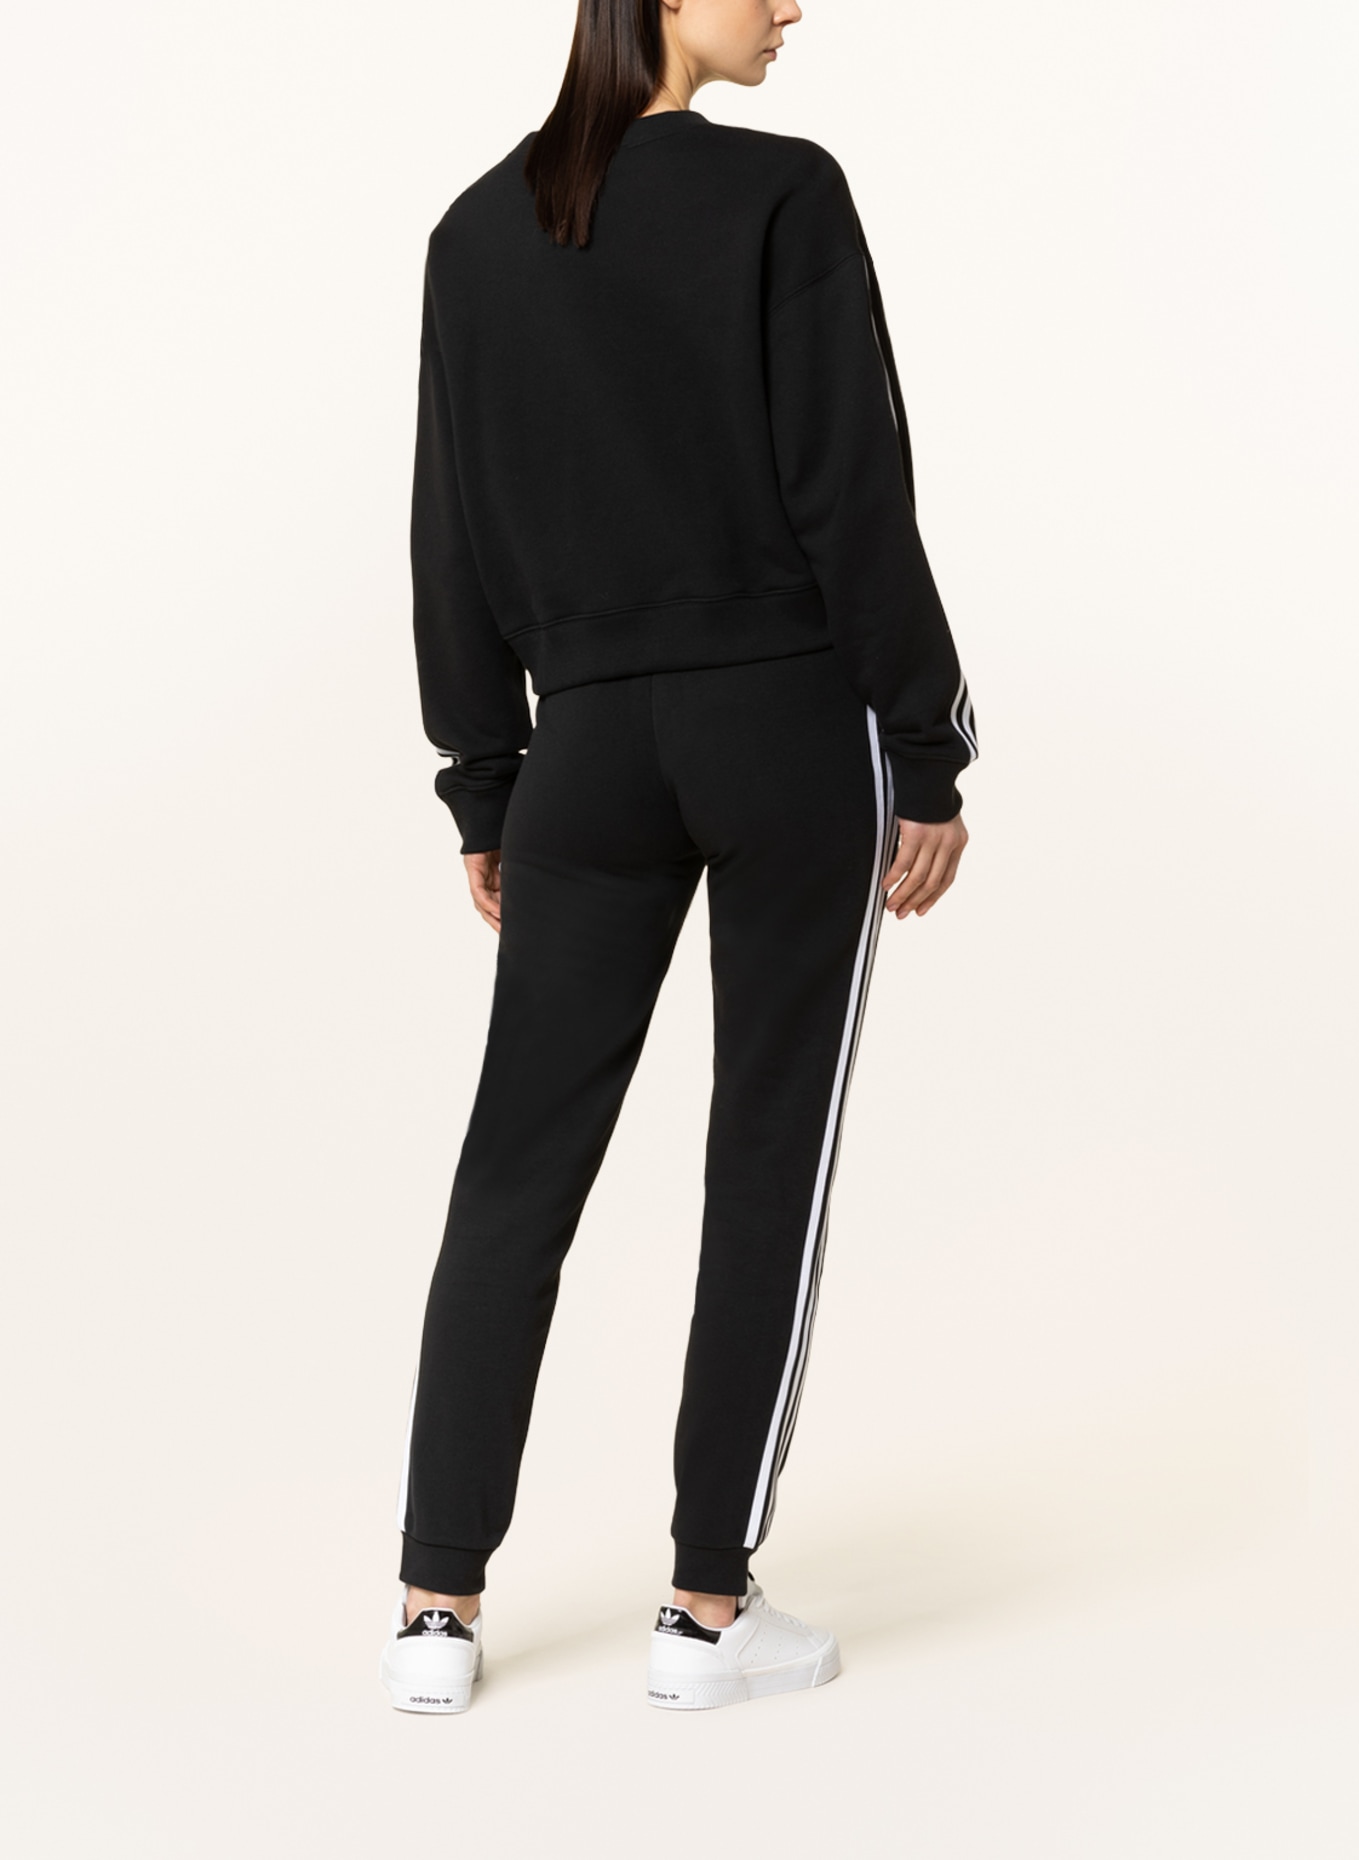 adidas Originals Pants in jogger style, Color: BLACK (Image 3)